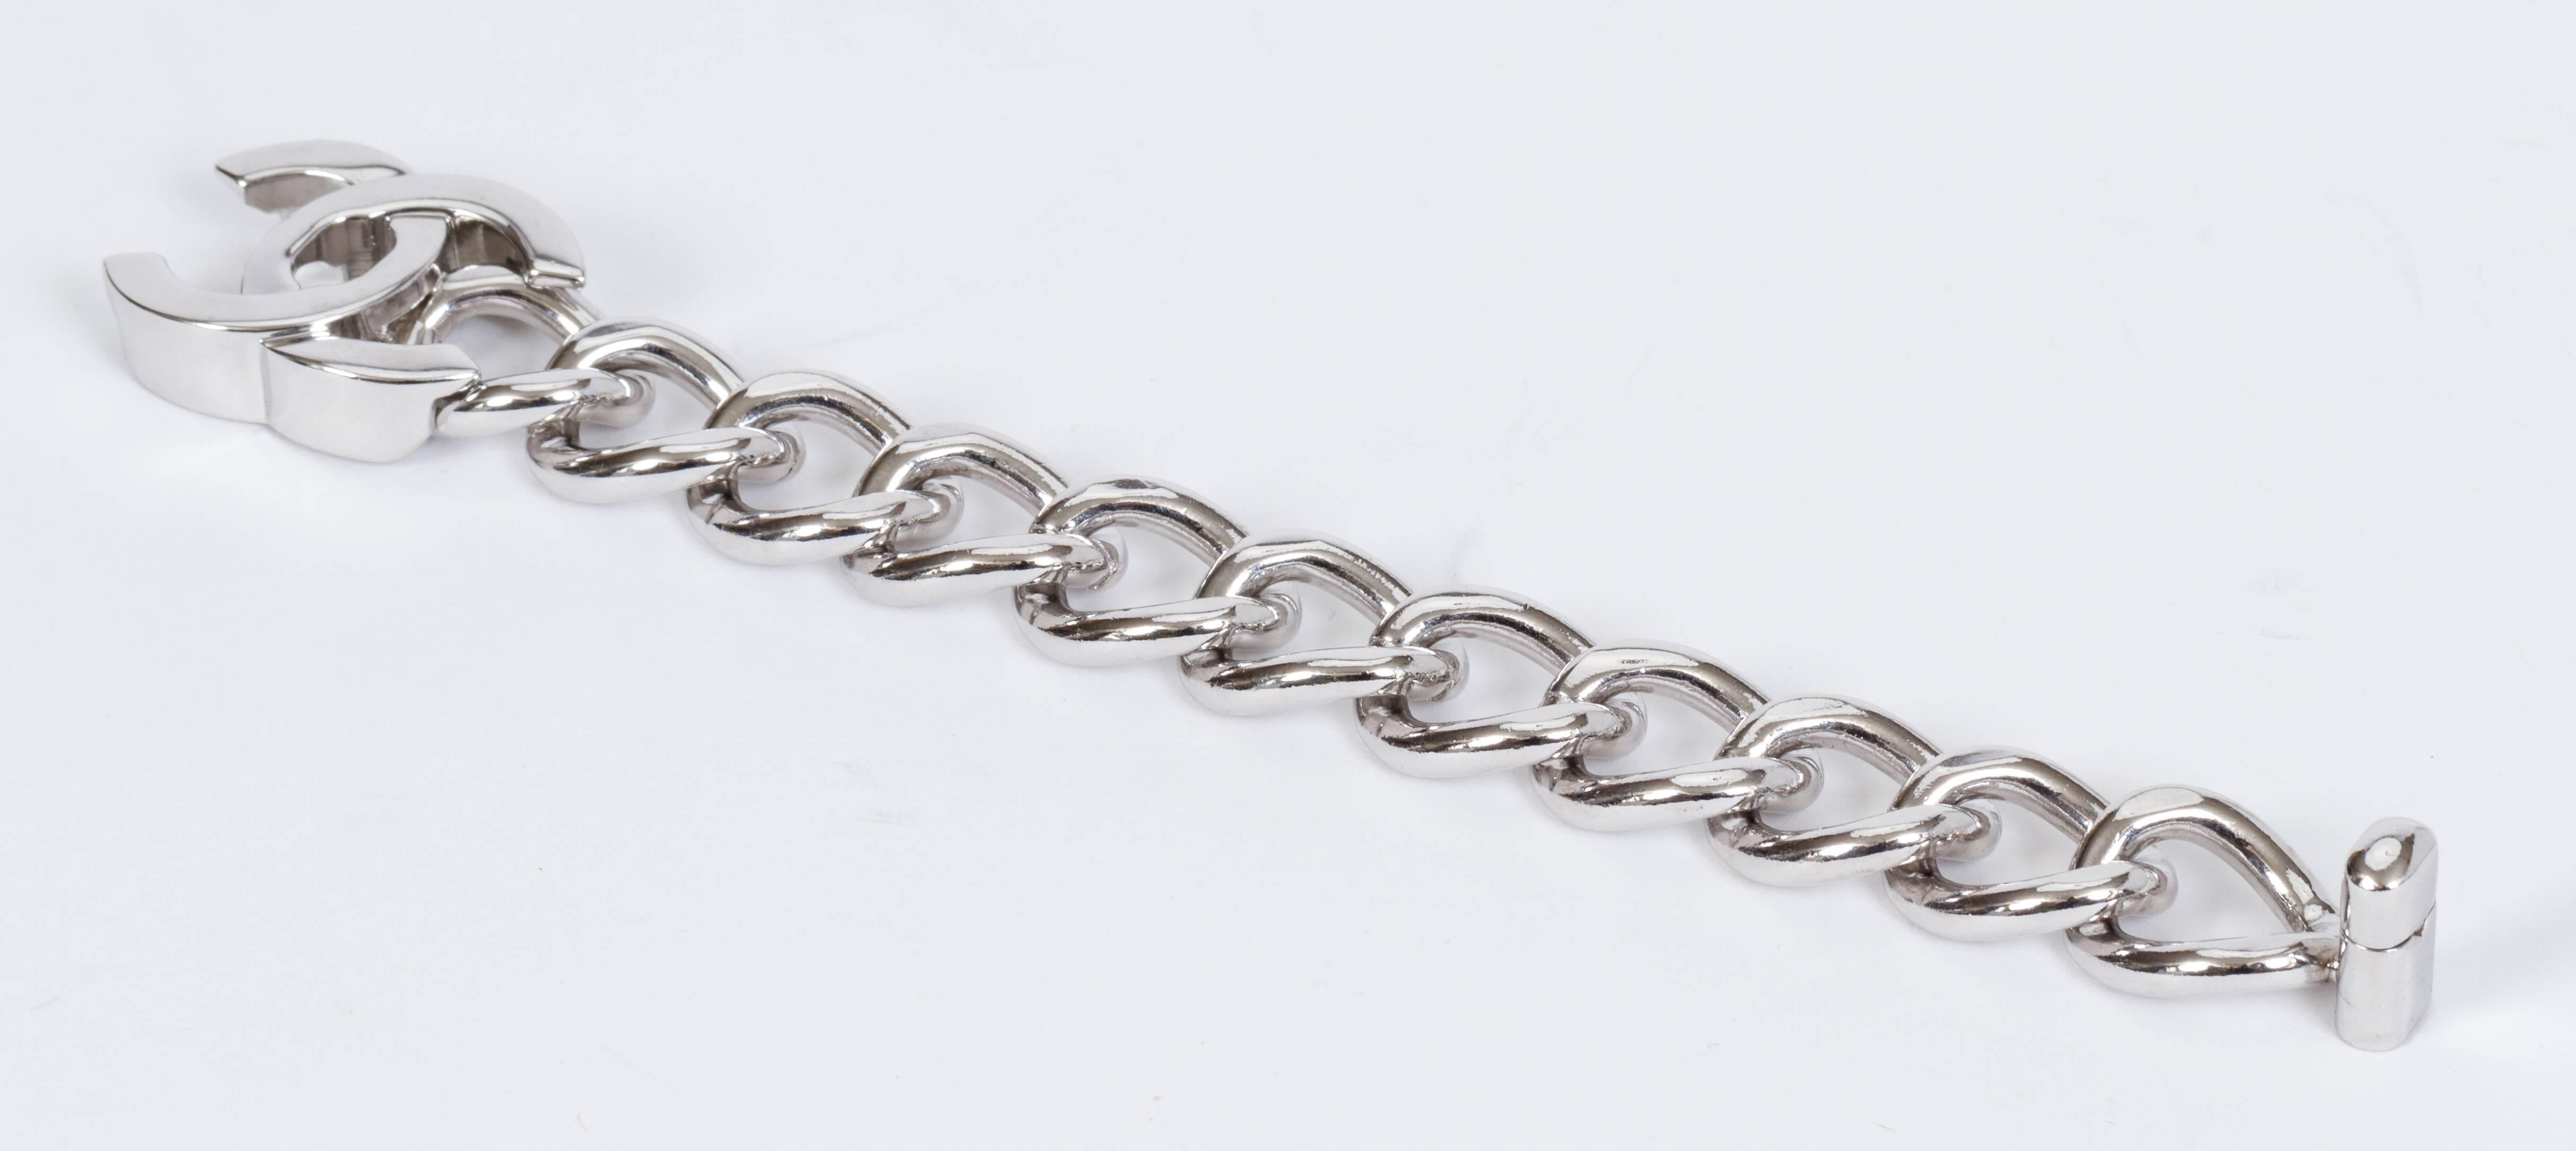 Chanel silver color turn lock bracelet with cc logo clasp. Collection spring 96. Measures 8.25